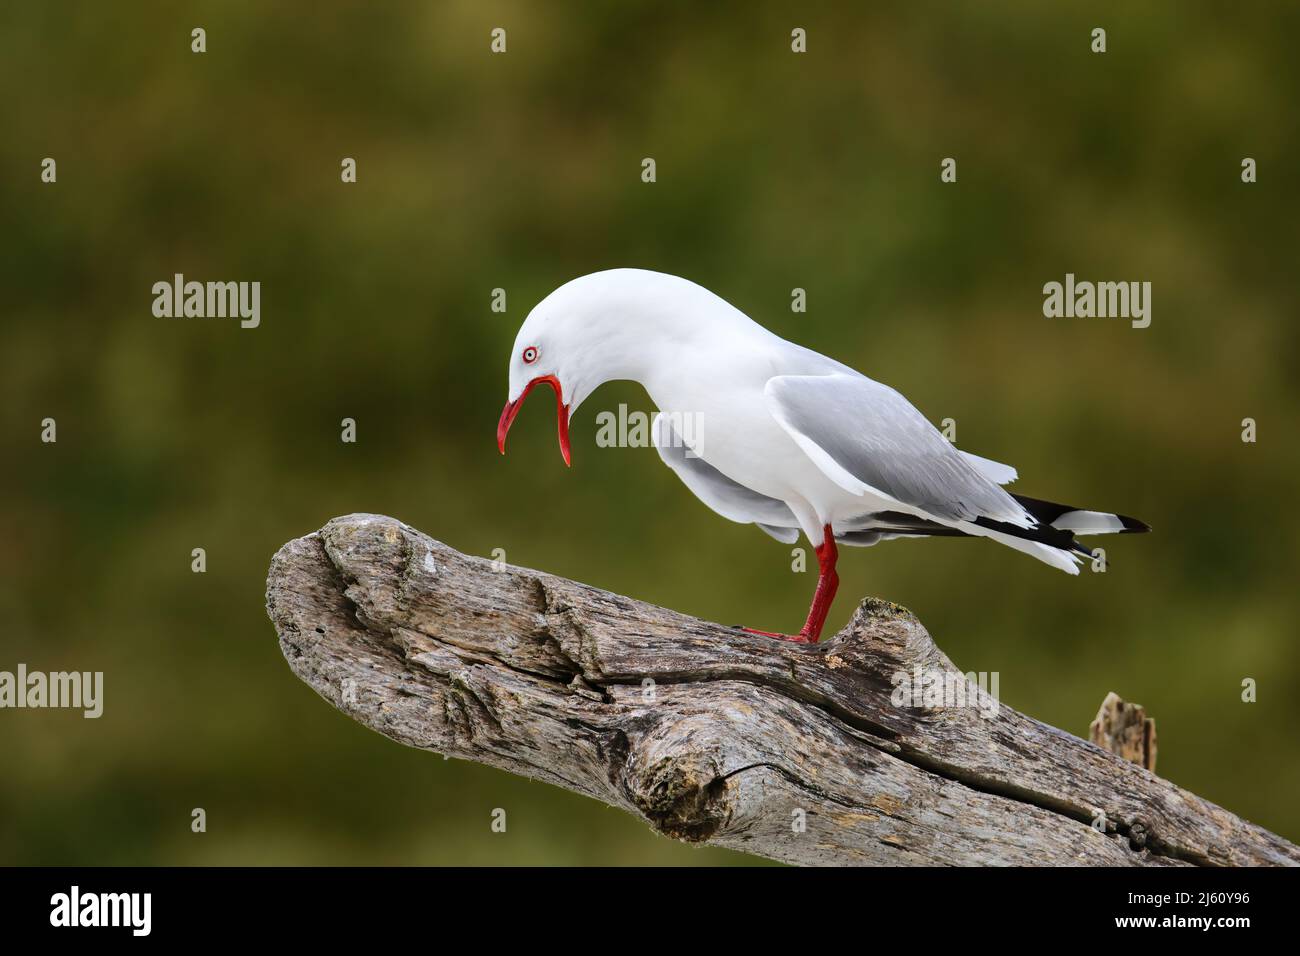 Red-billed gull calling, Kaikoura peninsula, South Island, New Zealand. This bird is native to New Zealand. Stock Photo